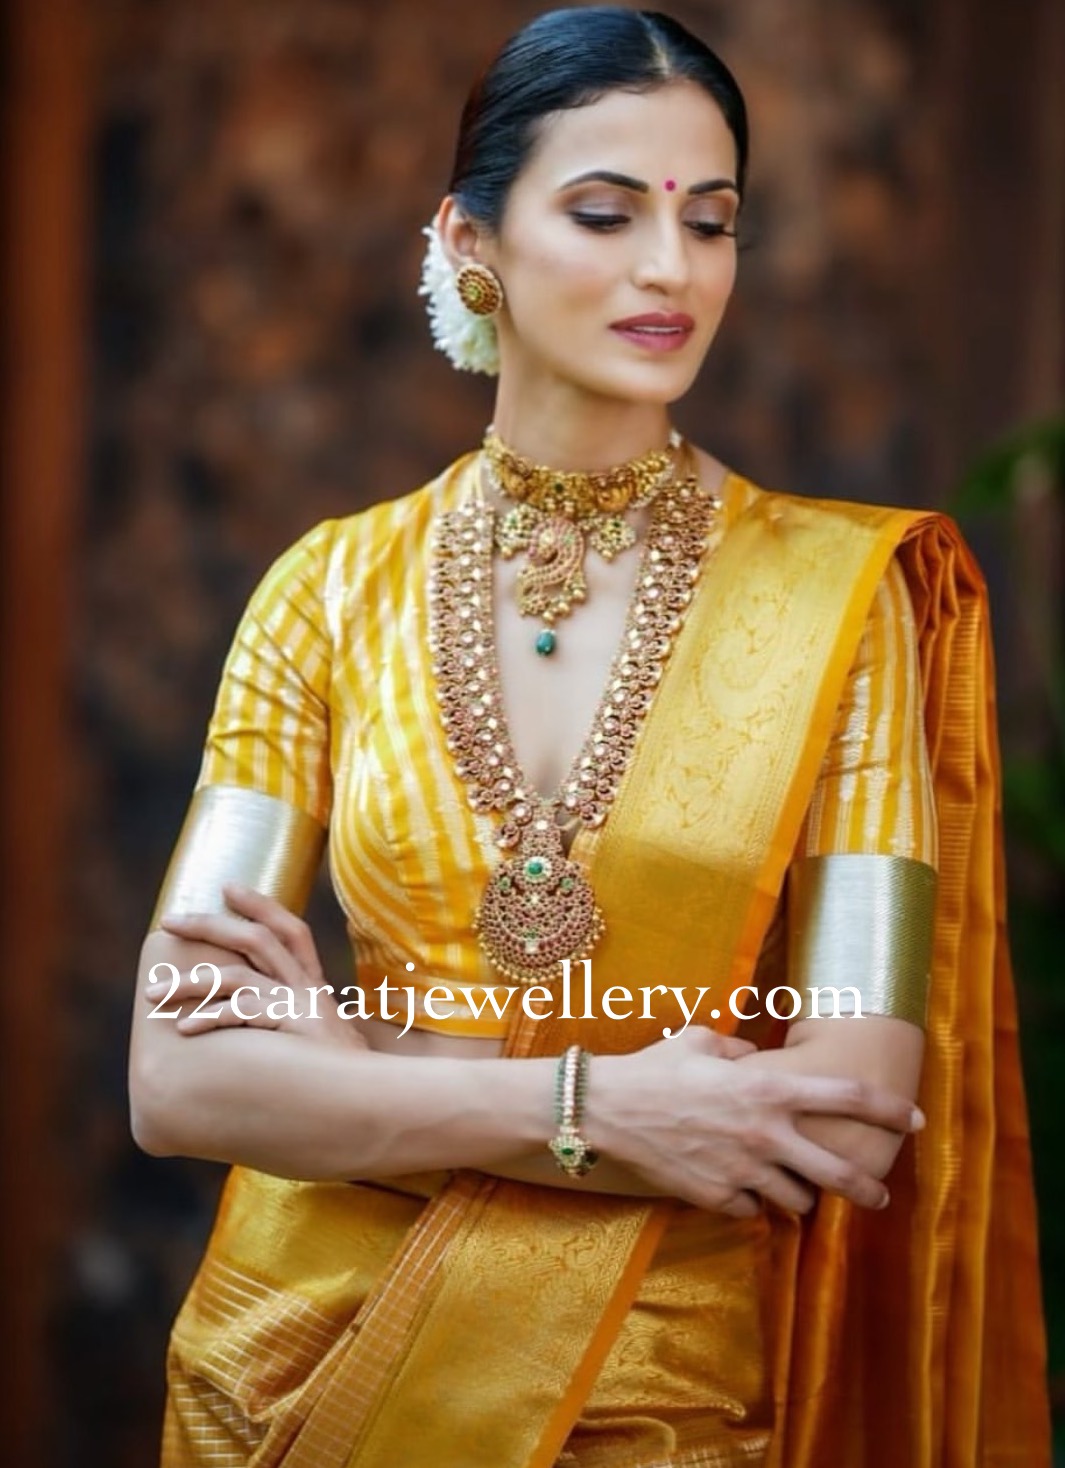 15 TYPES OF TRADITIONAL JEWELLERY FOR SAREE AND LEHENGA